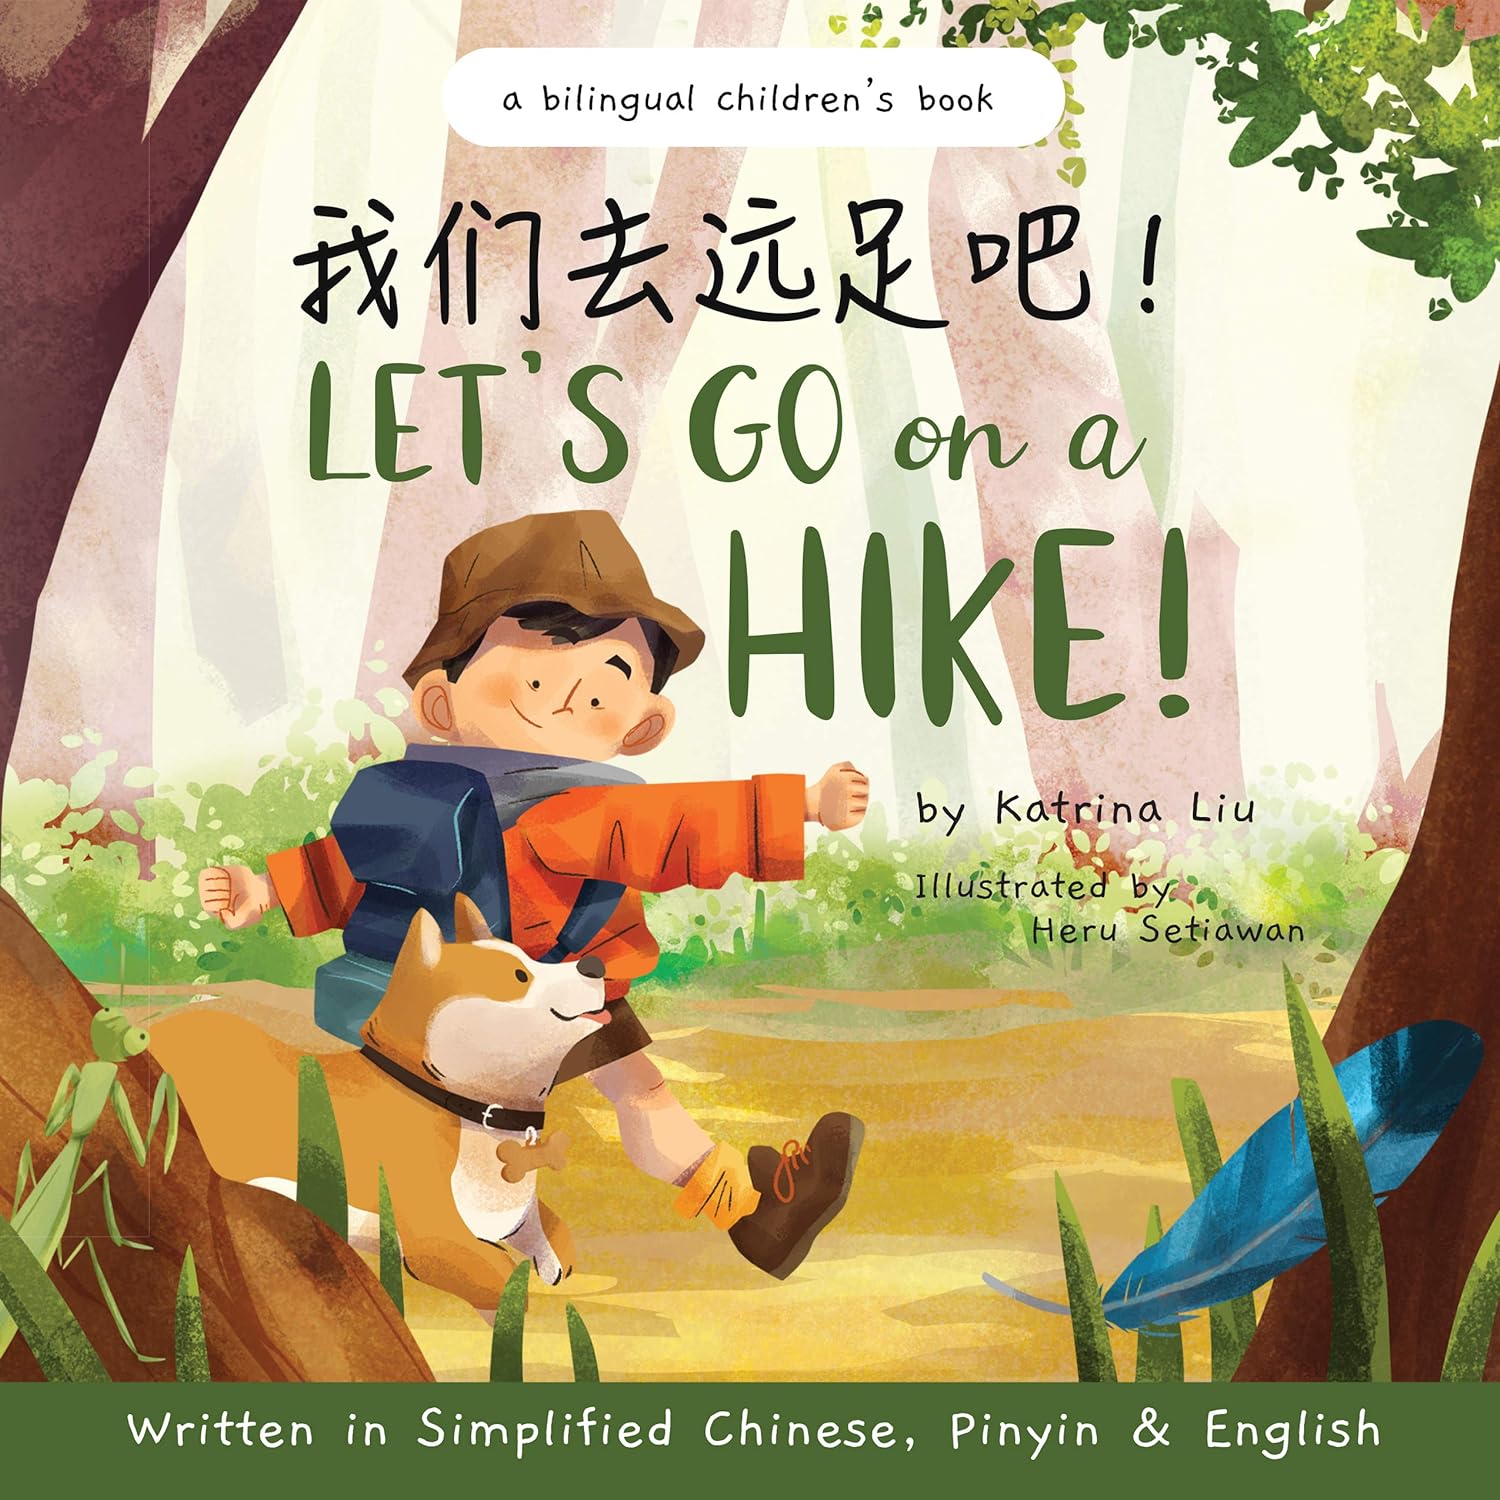 Let's Go on a Hike! 我们去远足吧！我們去遠足吧！AAPI picture book for kids about a mixed race Asian / Caucasian family.